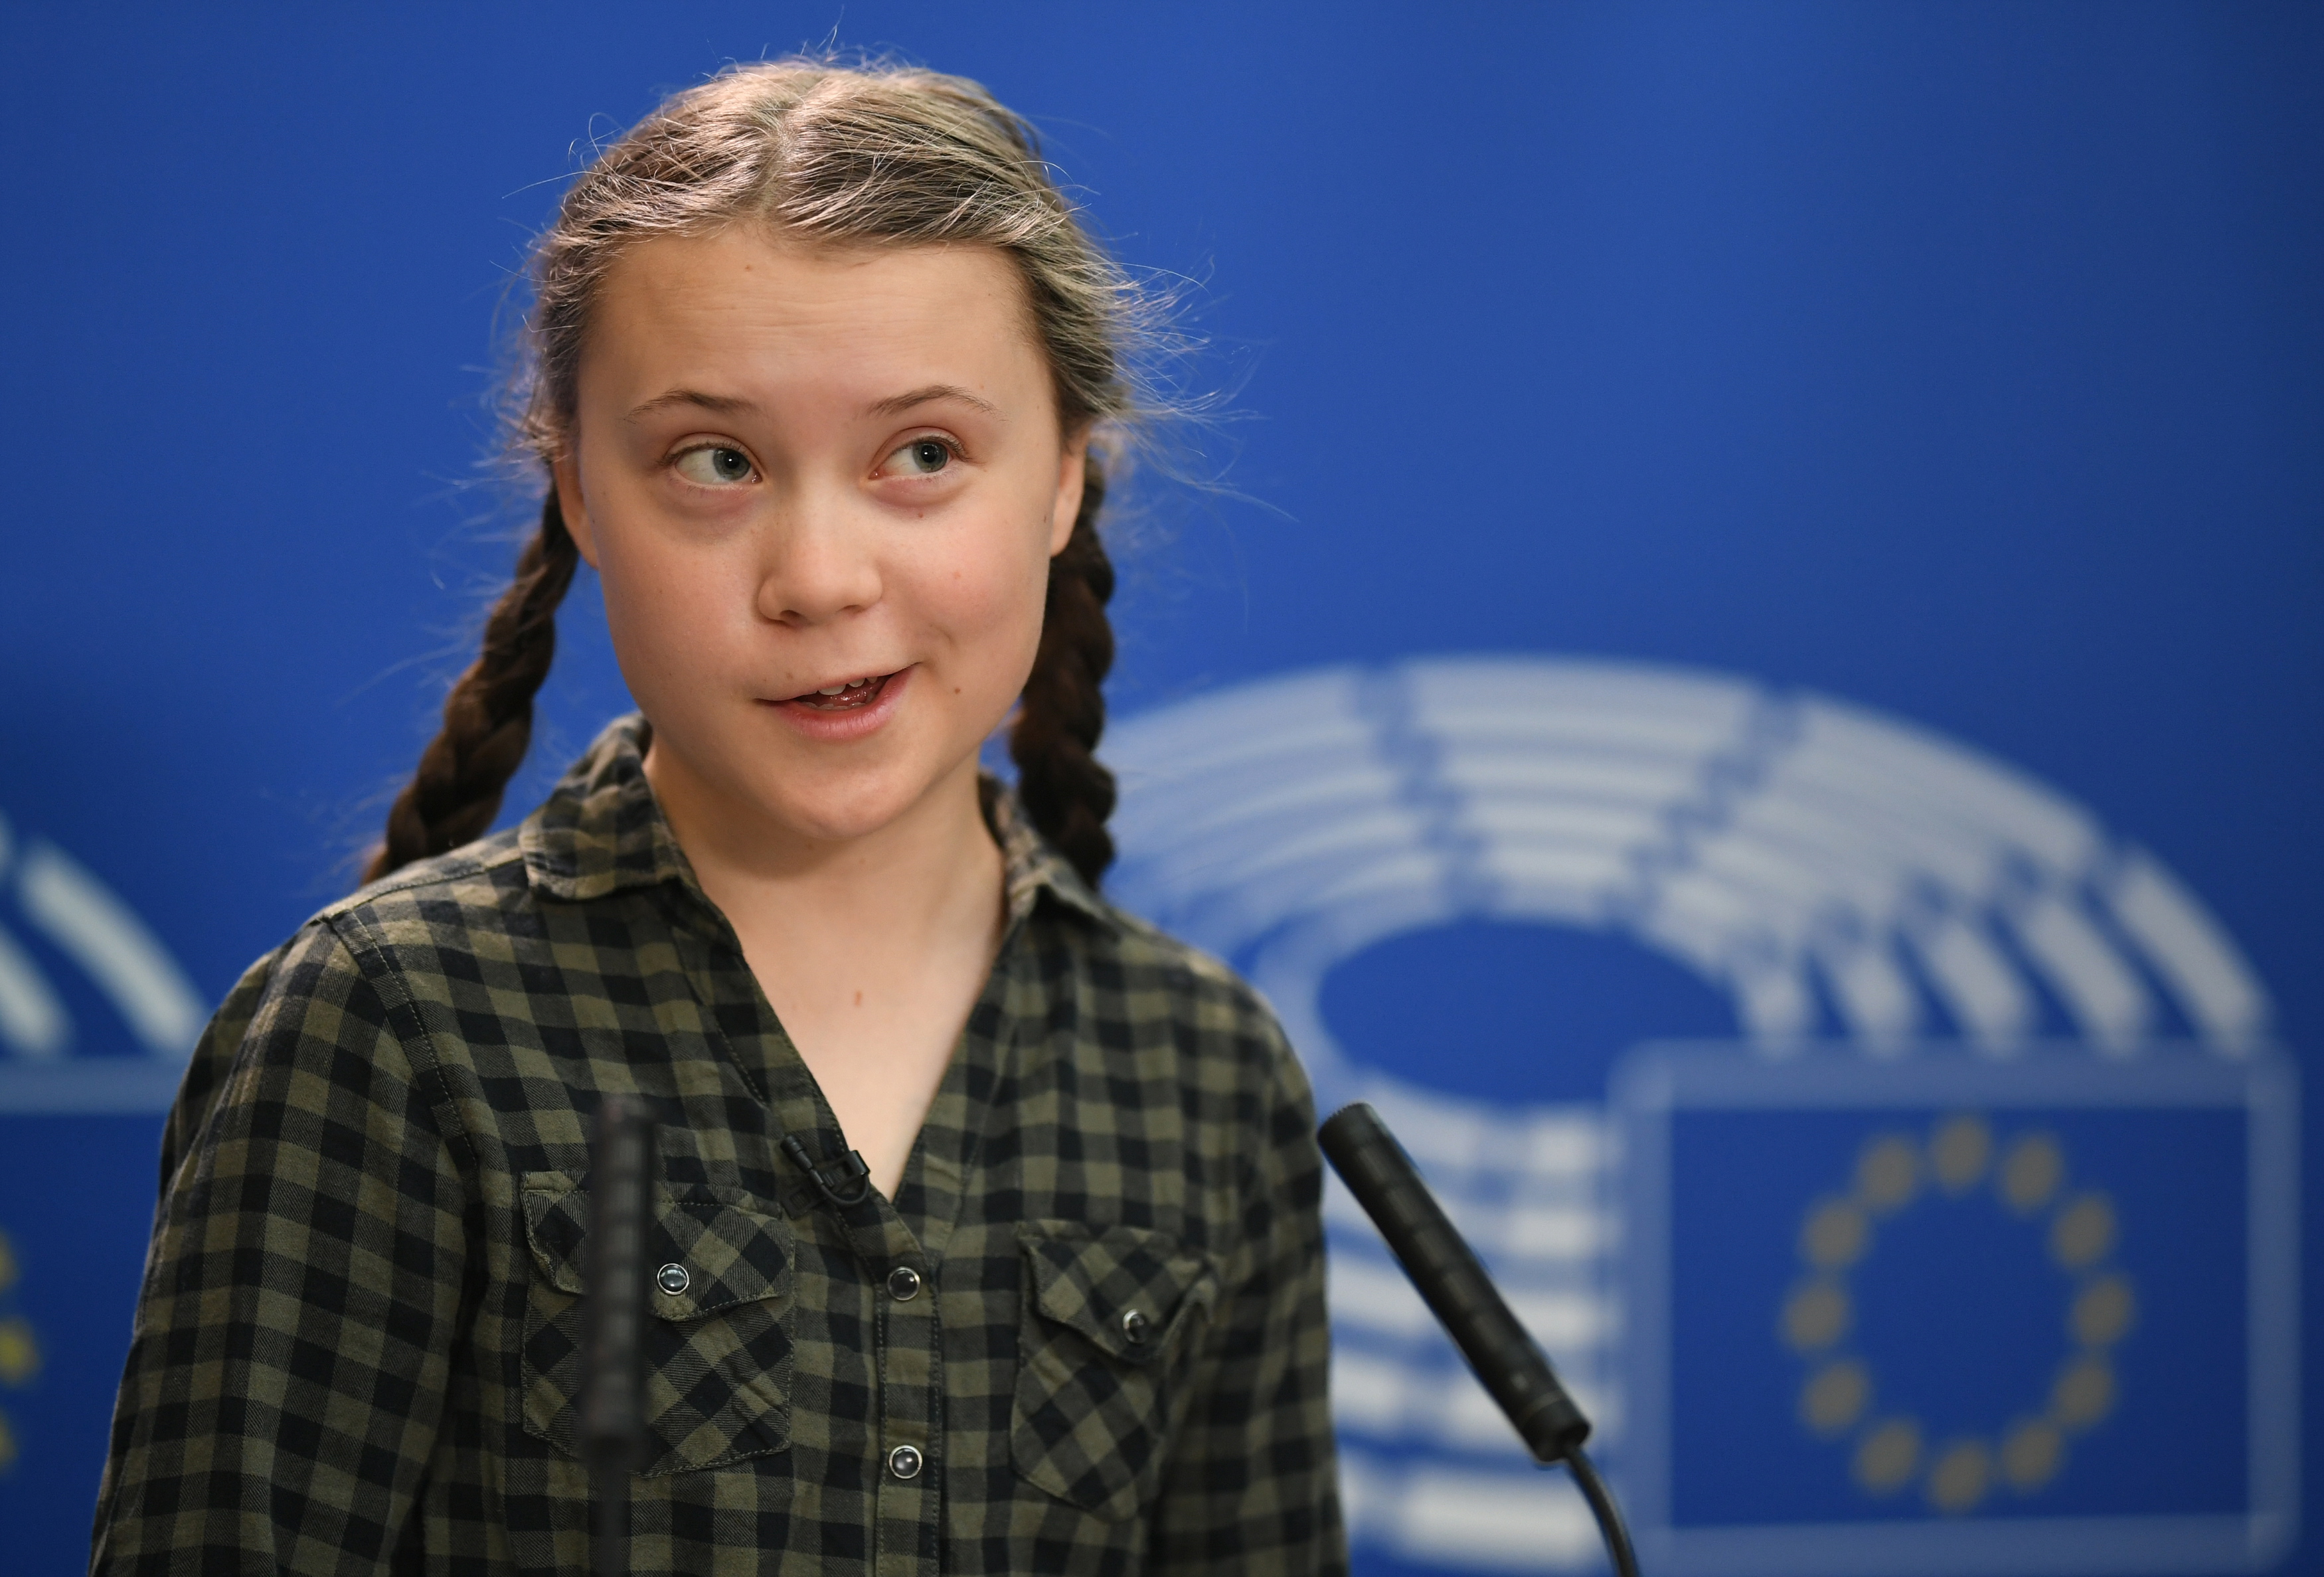 epa07509633 Swedish climate activist Greta Thunberg delivers her speech during a press briefing at the European Parliament in Strasbourg, France, 16 April 2019.  EPA/PATRICK SEEGER